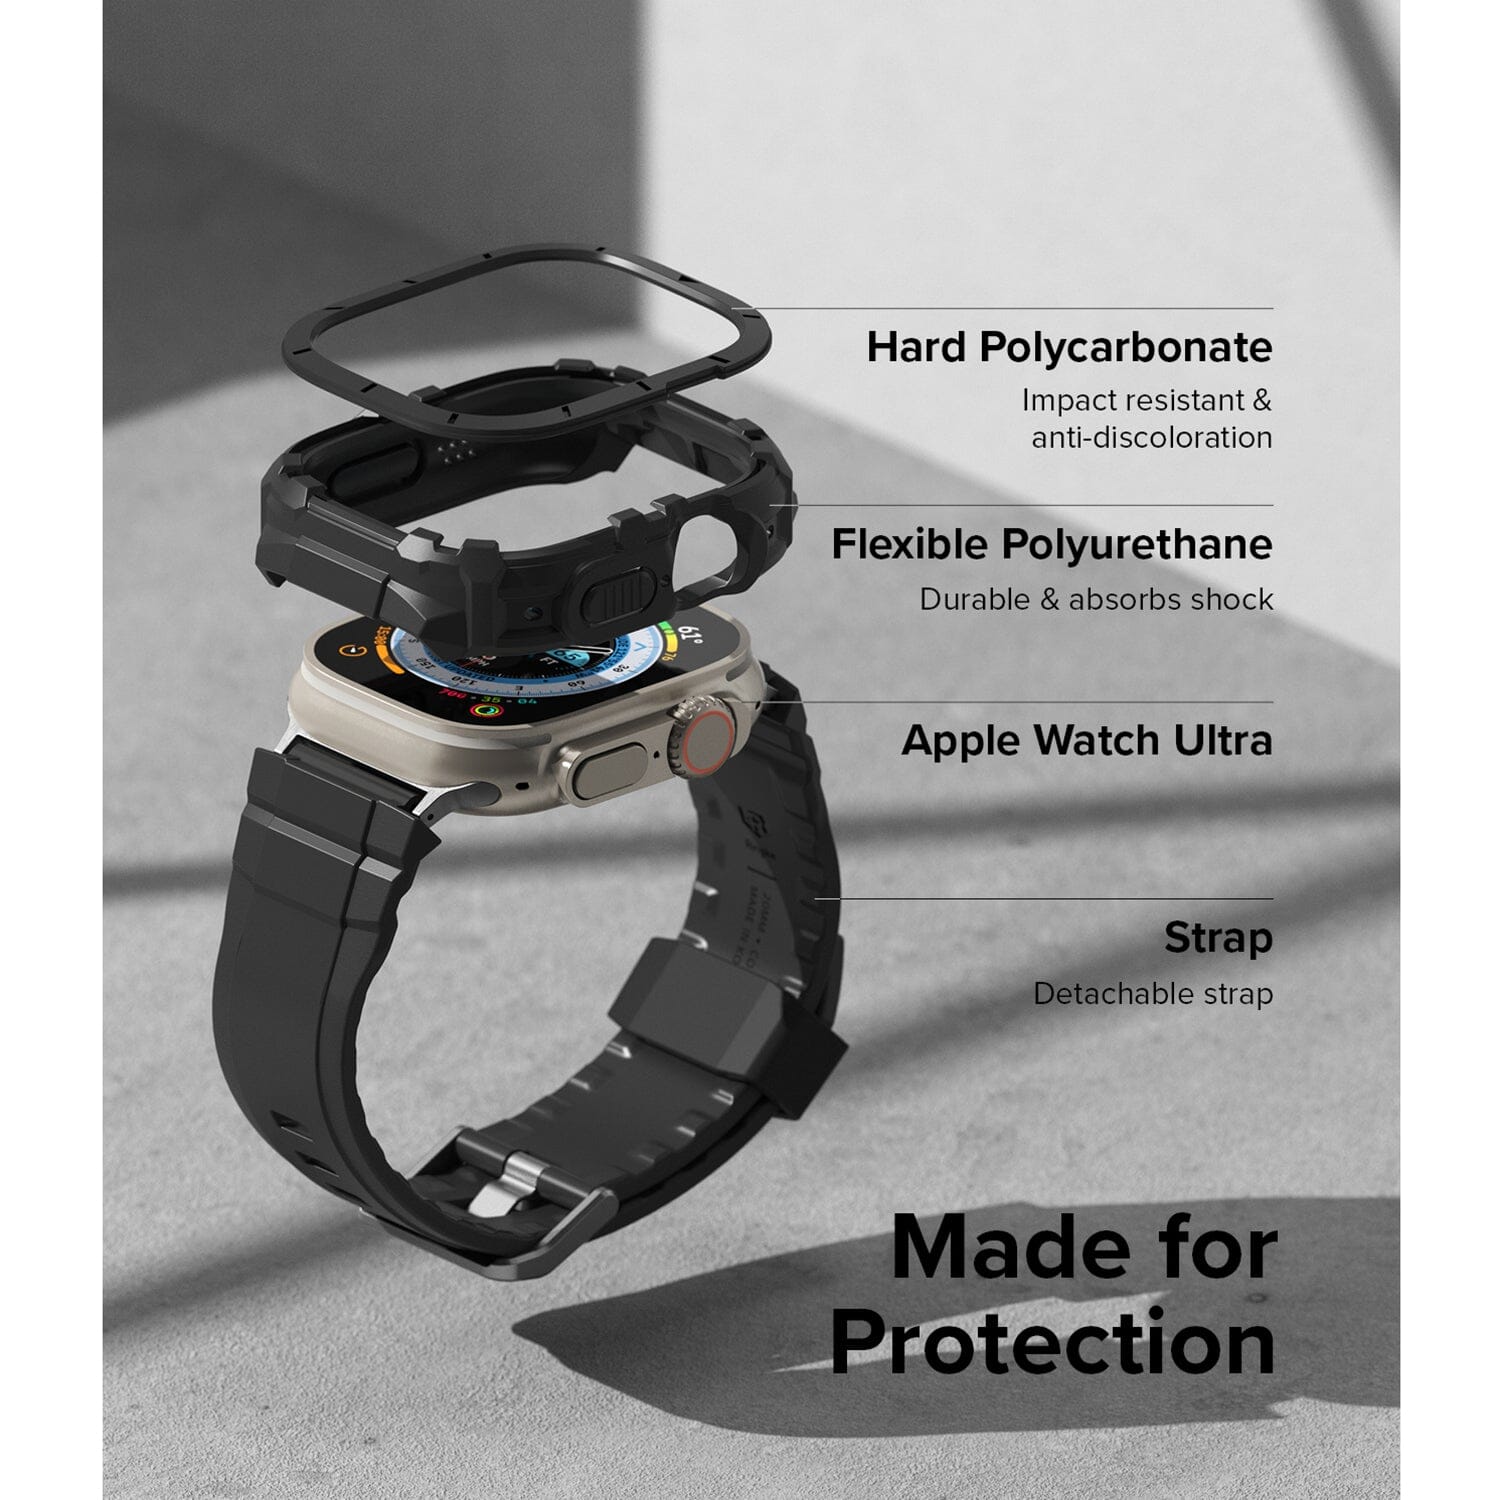 Ringke Fusion X Guard for Apple Watch Ultra 49mm ONE2WORLD 